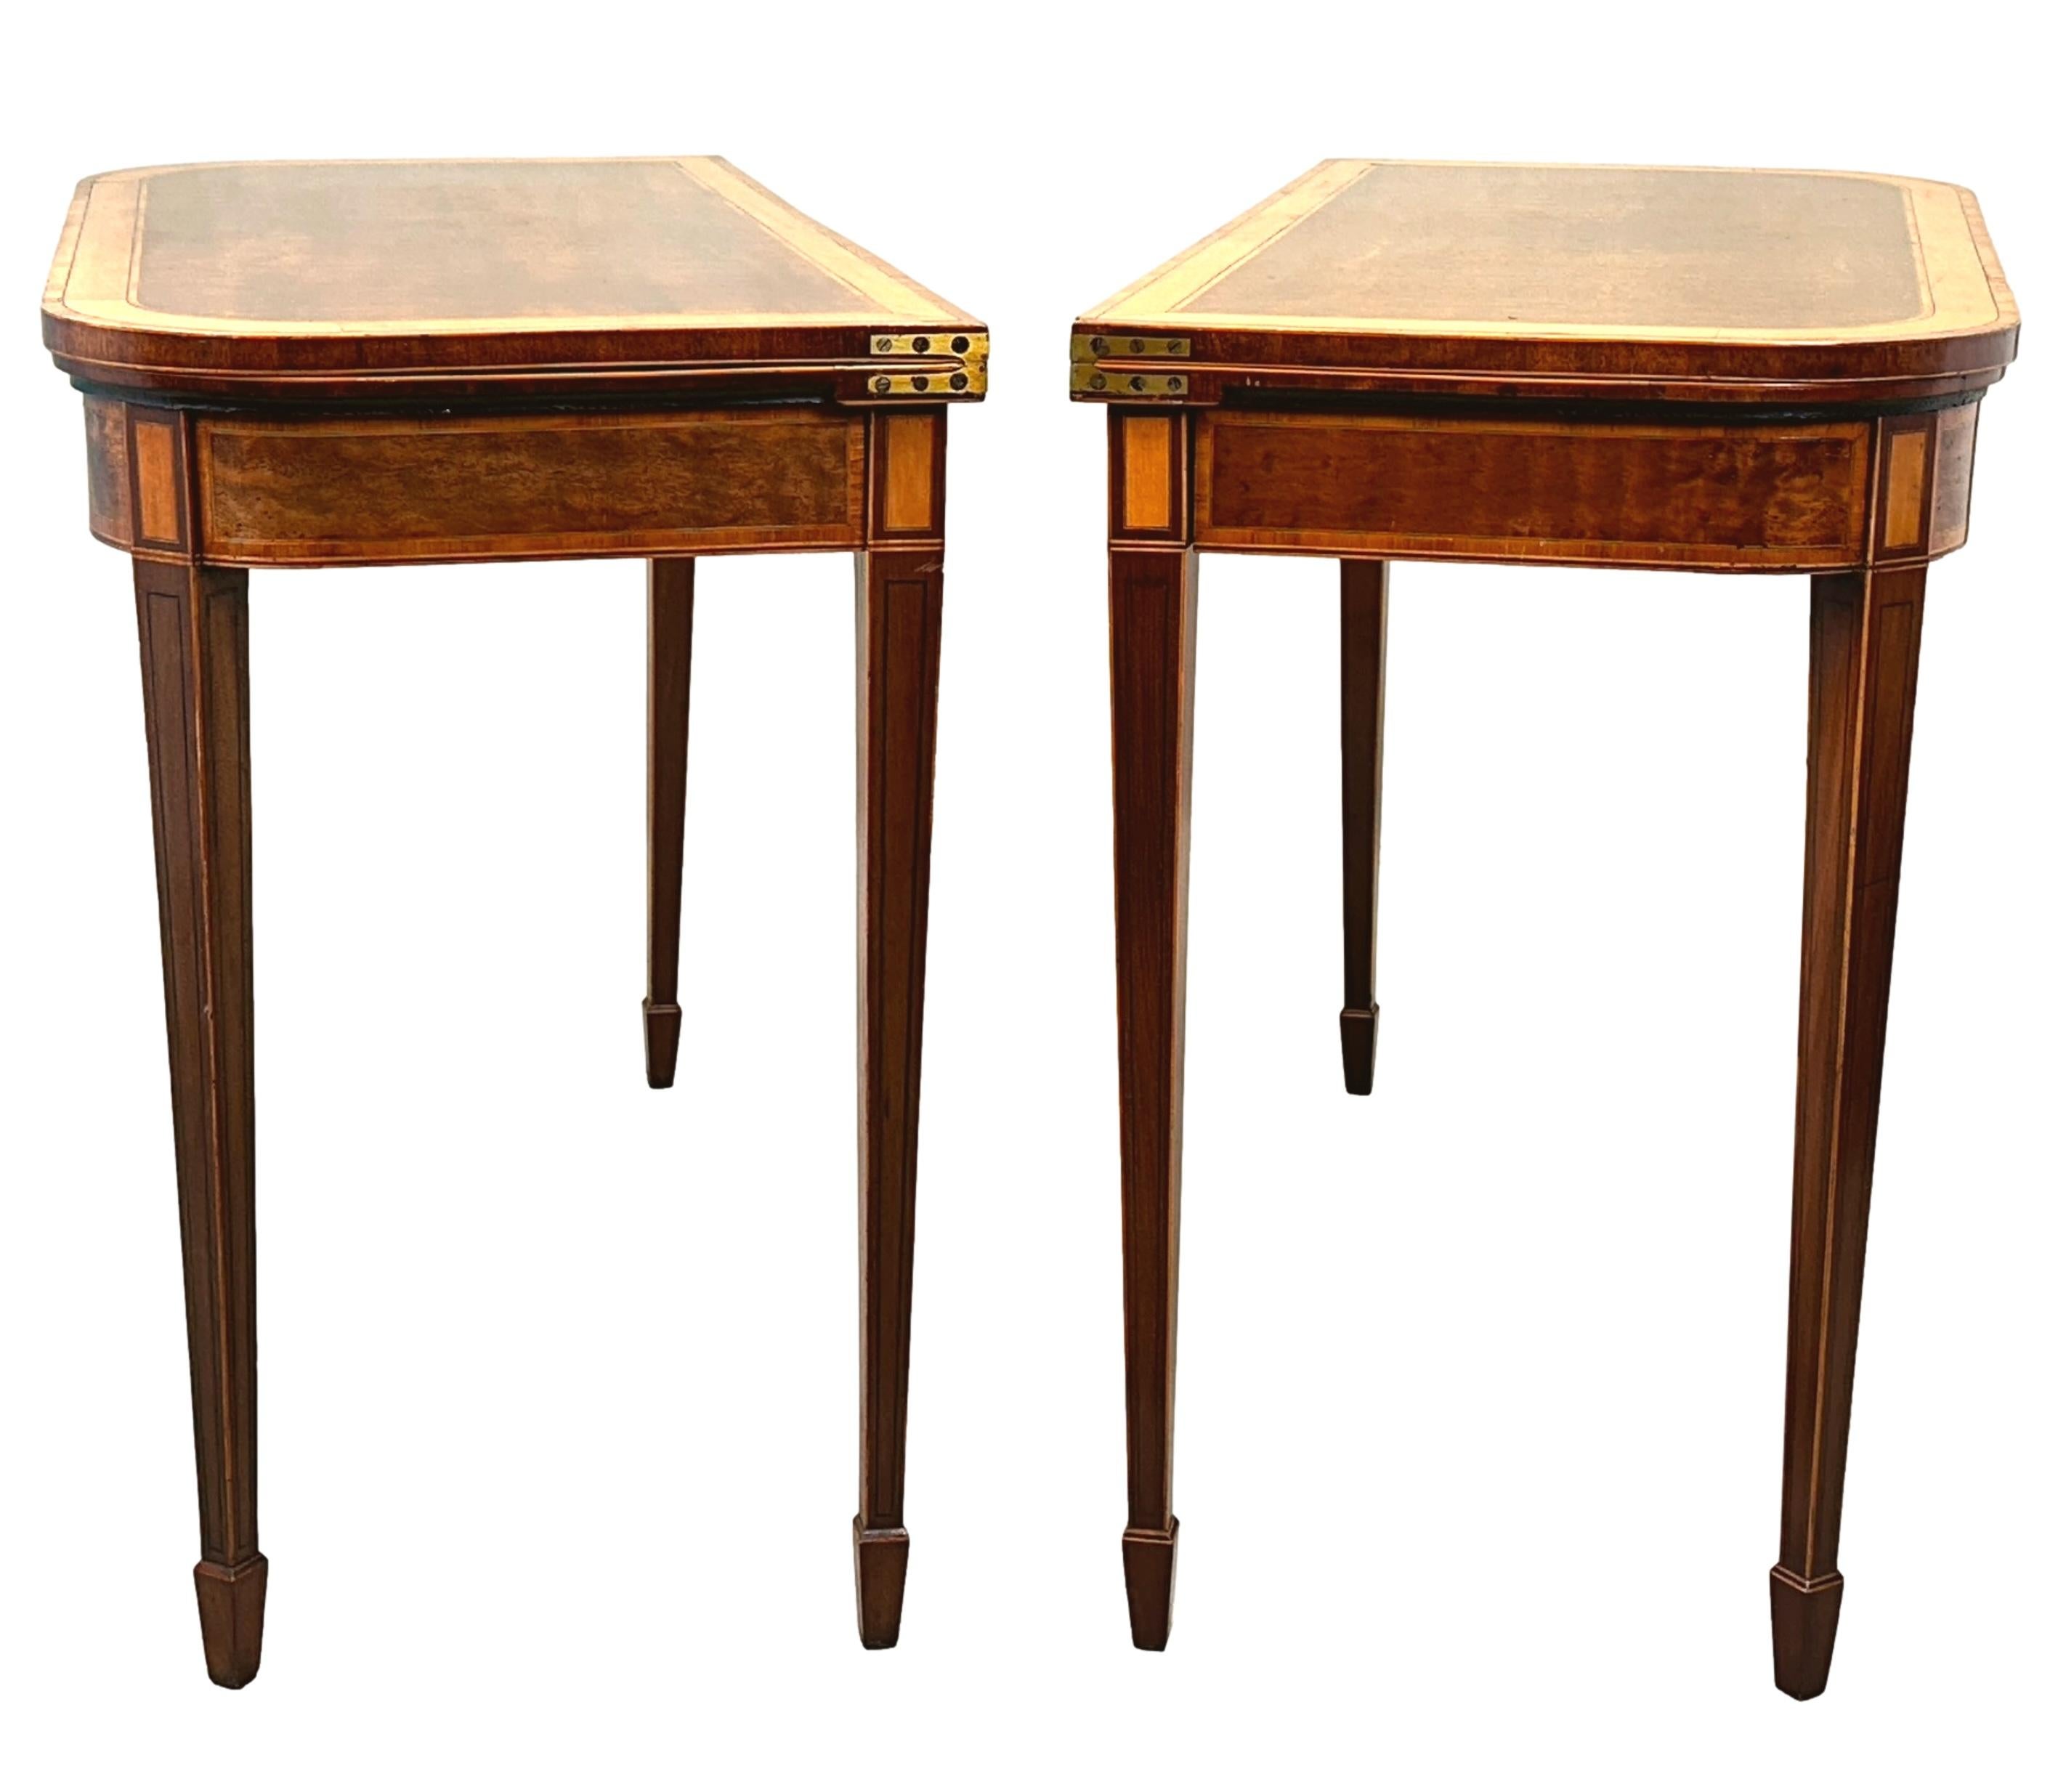 A Very Fine Pair Of Late 18th Century, Georgian, Sheraton Period Mahogany Card Tables, Of D Shaped Form, Having Superbly Figured Foldover Tops With Crossbanded Satinwood Decoration And Enclosed Baized Playing Surface To Interiors, Over Freize With